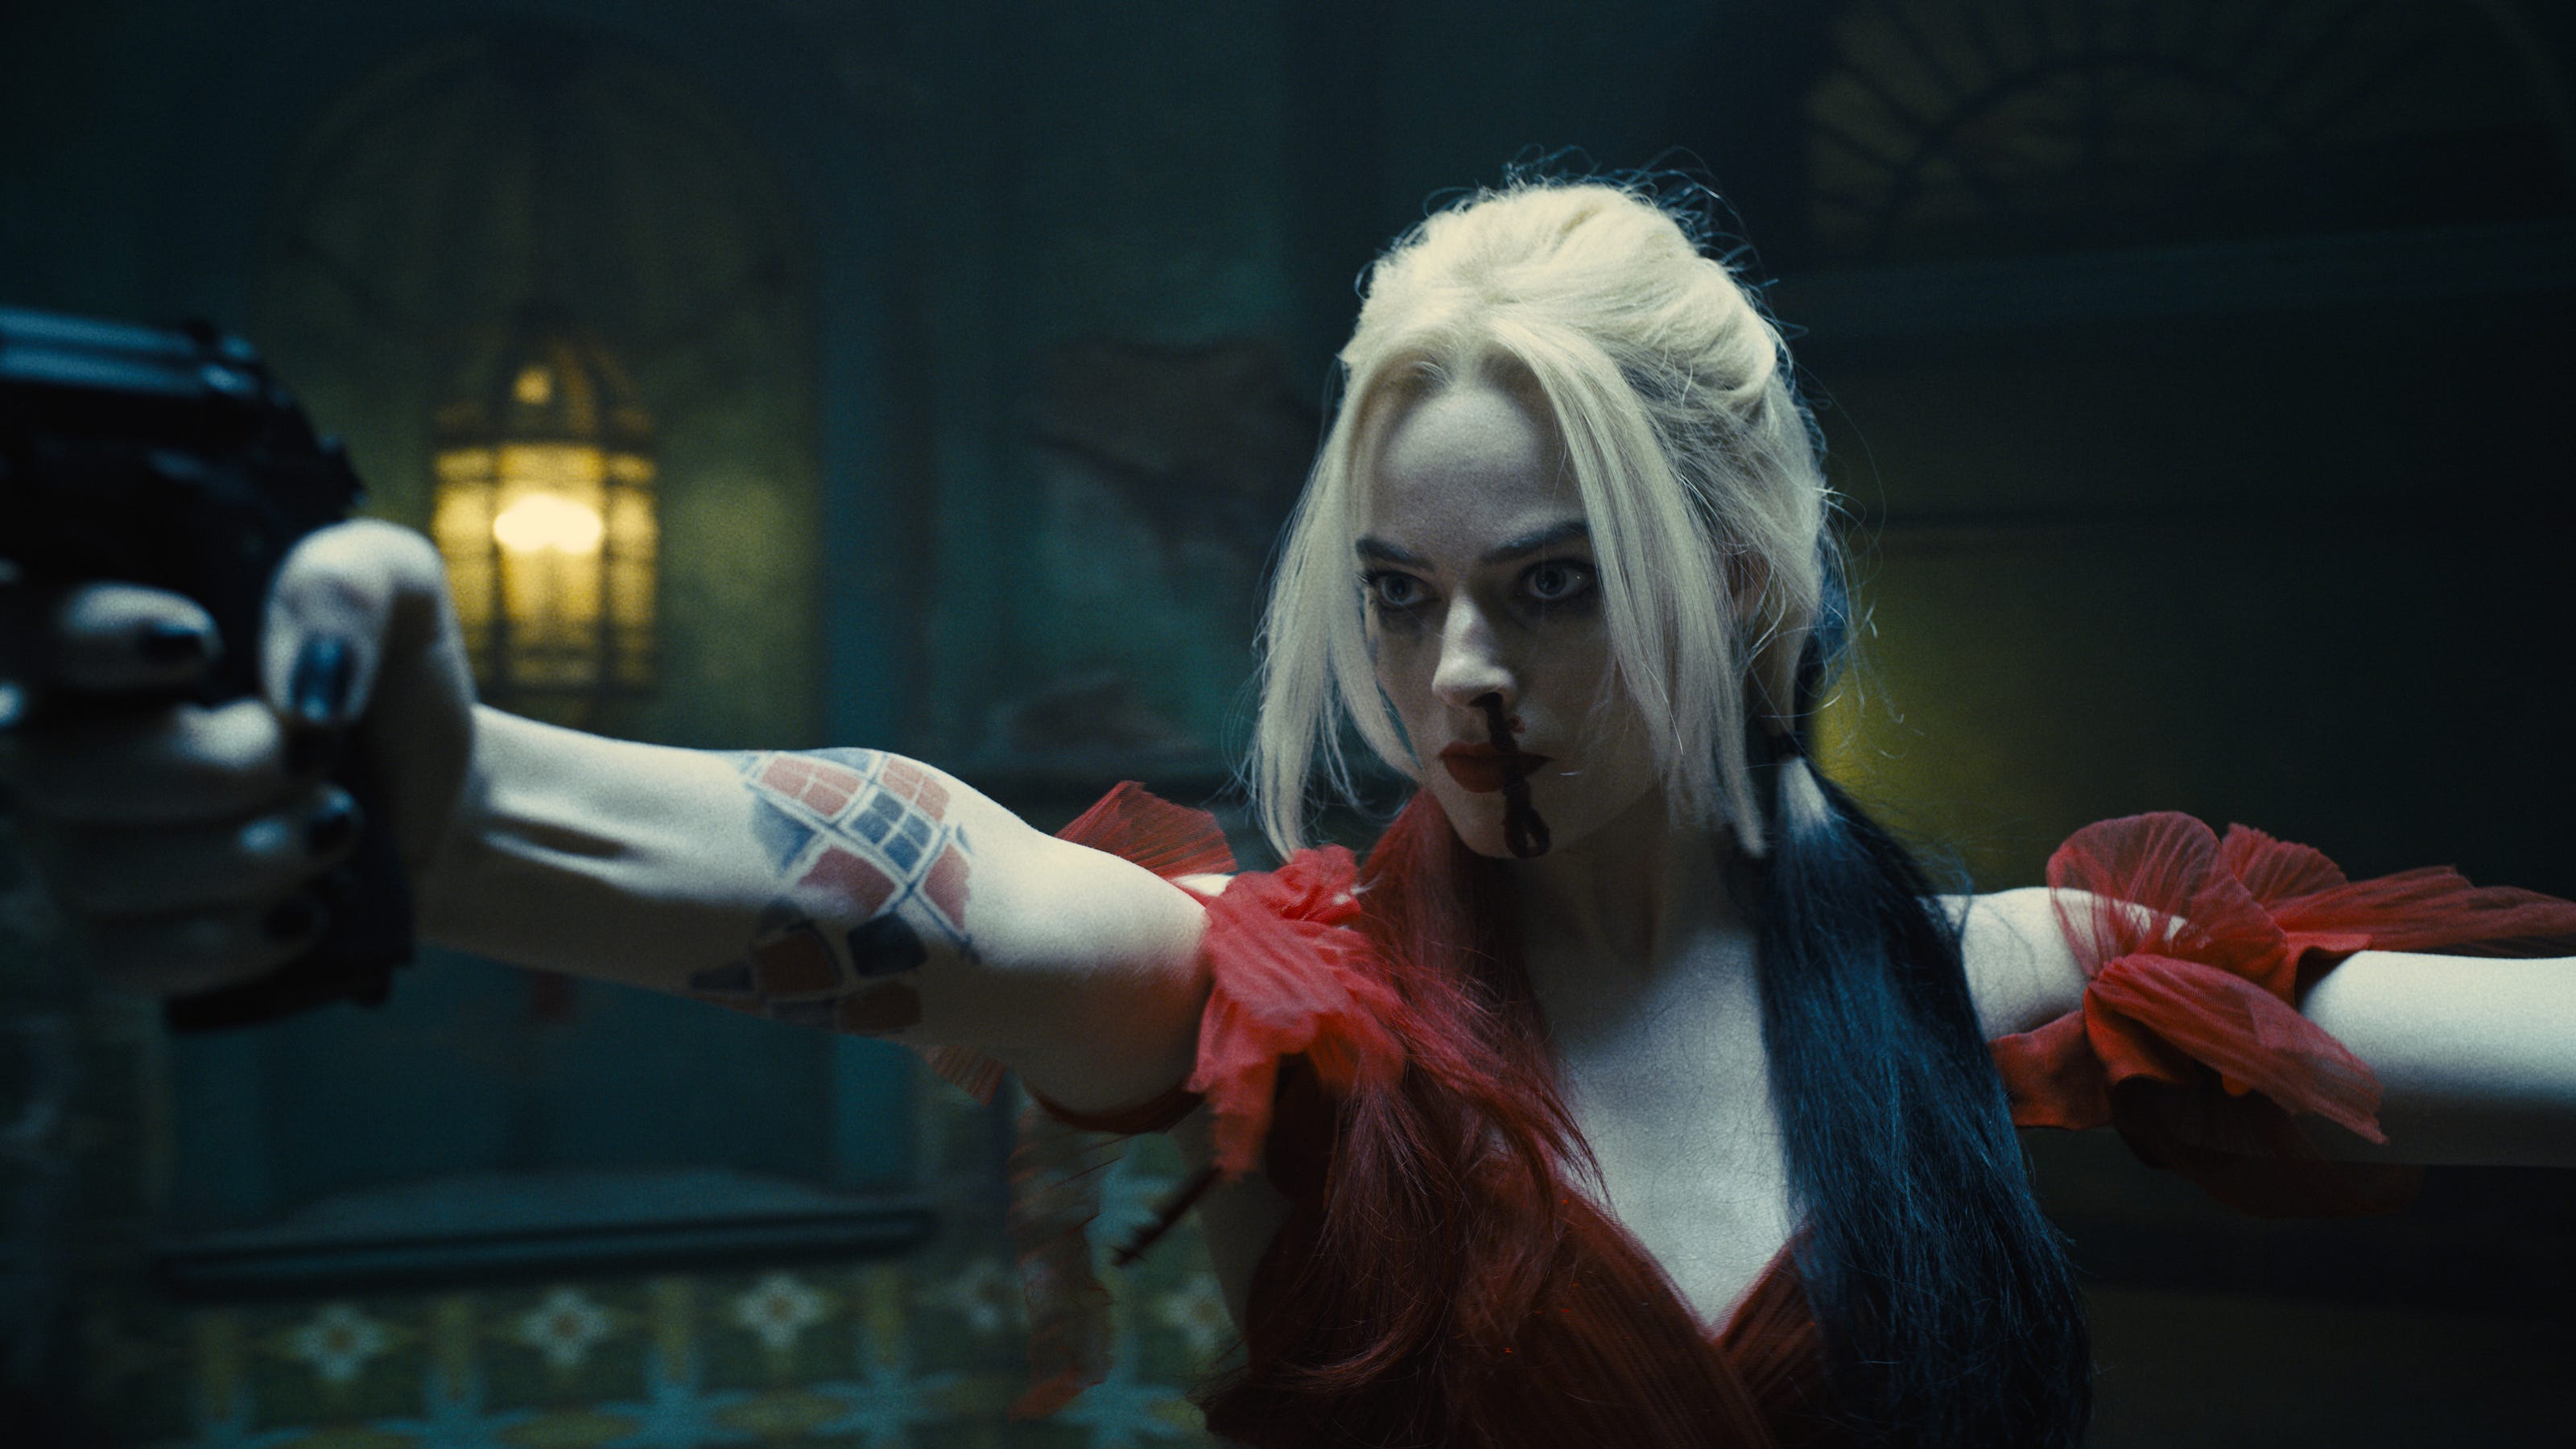 'The Suicide Squad: Margot Robbie's Harley Quinn is dating again